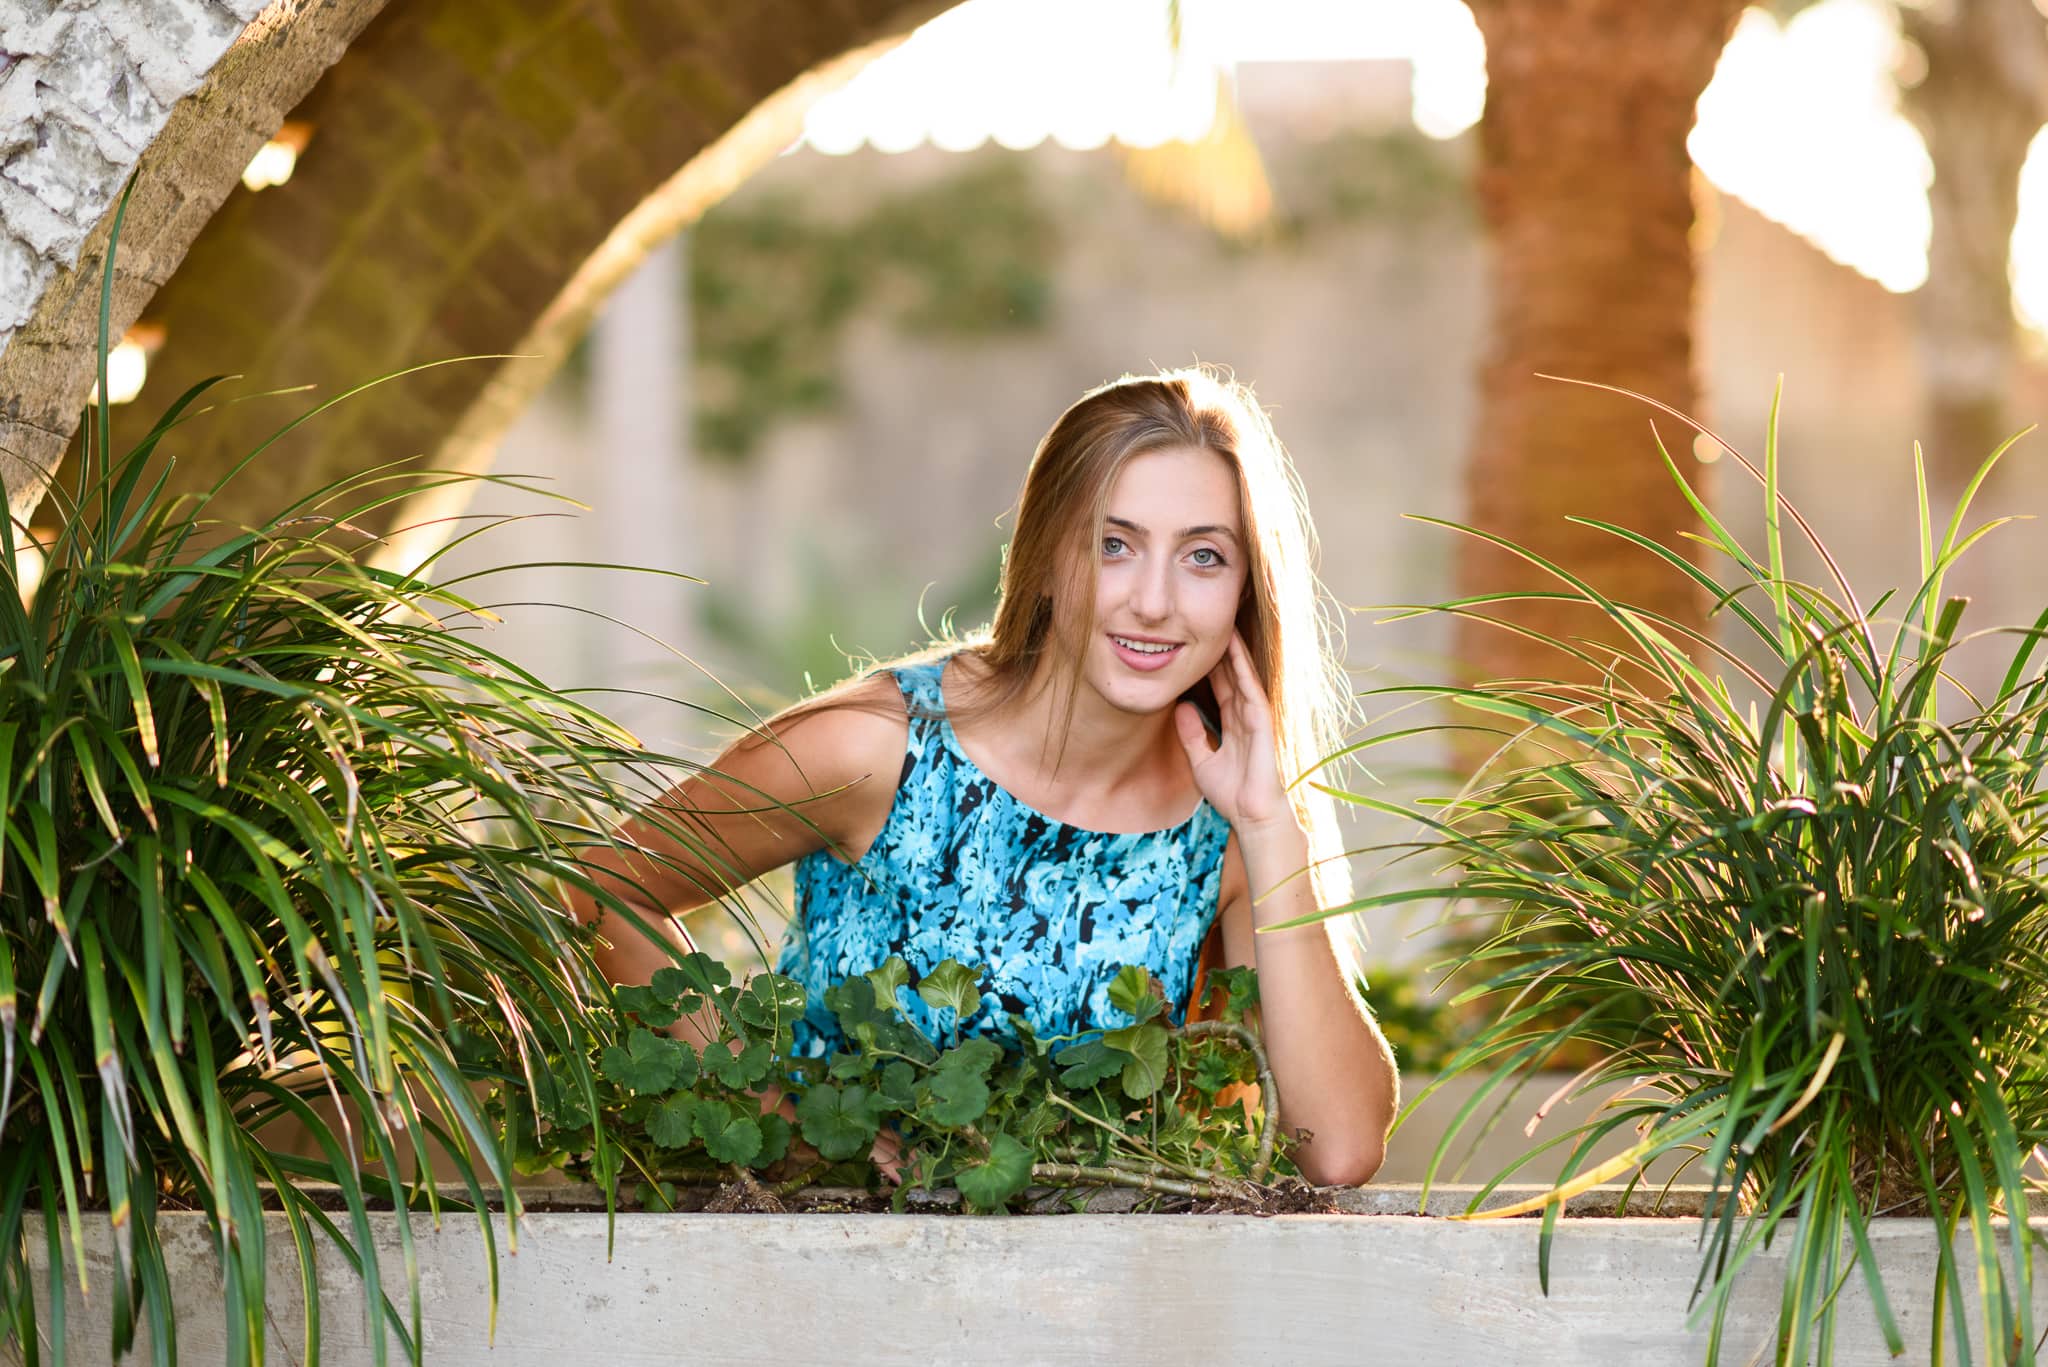 Leaning on the flowerbox - Atalaya Castle